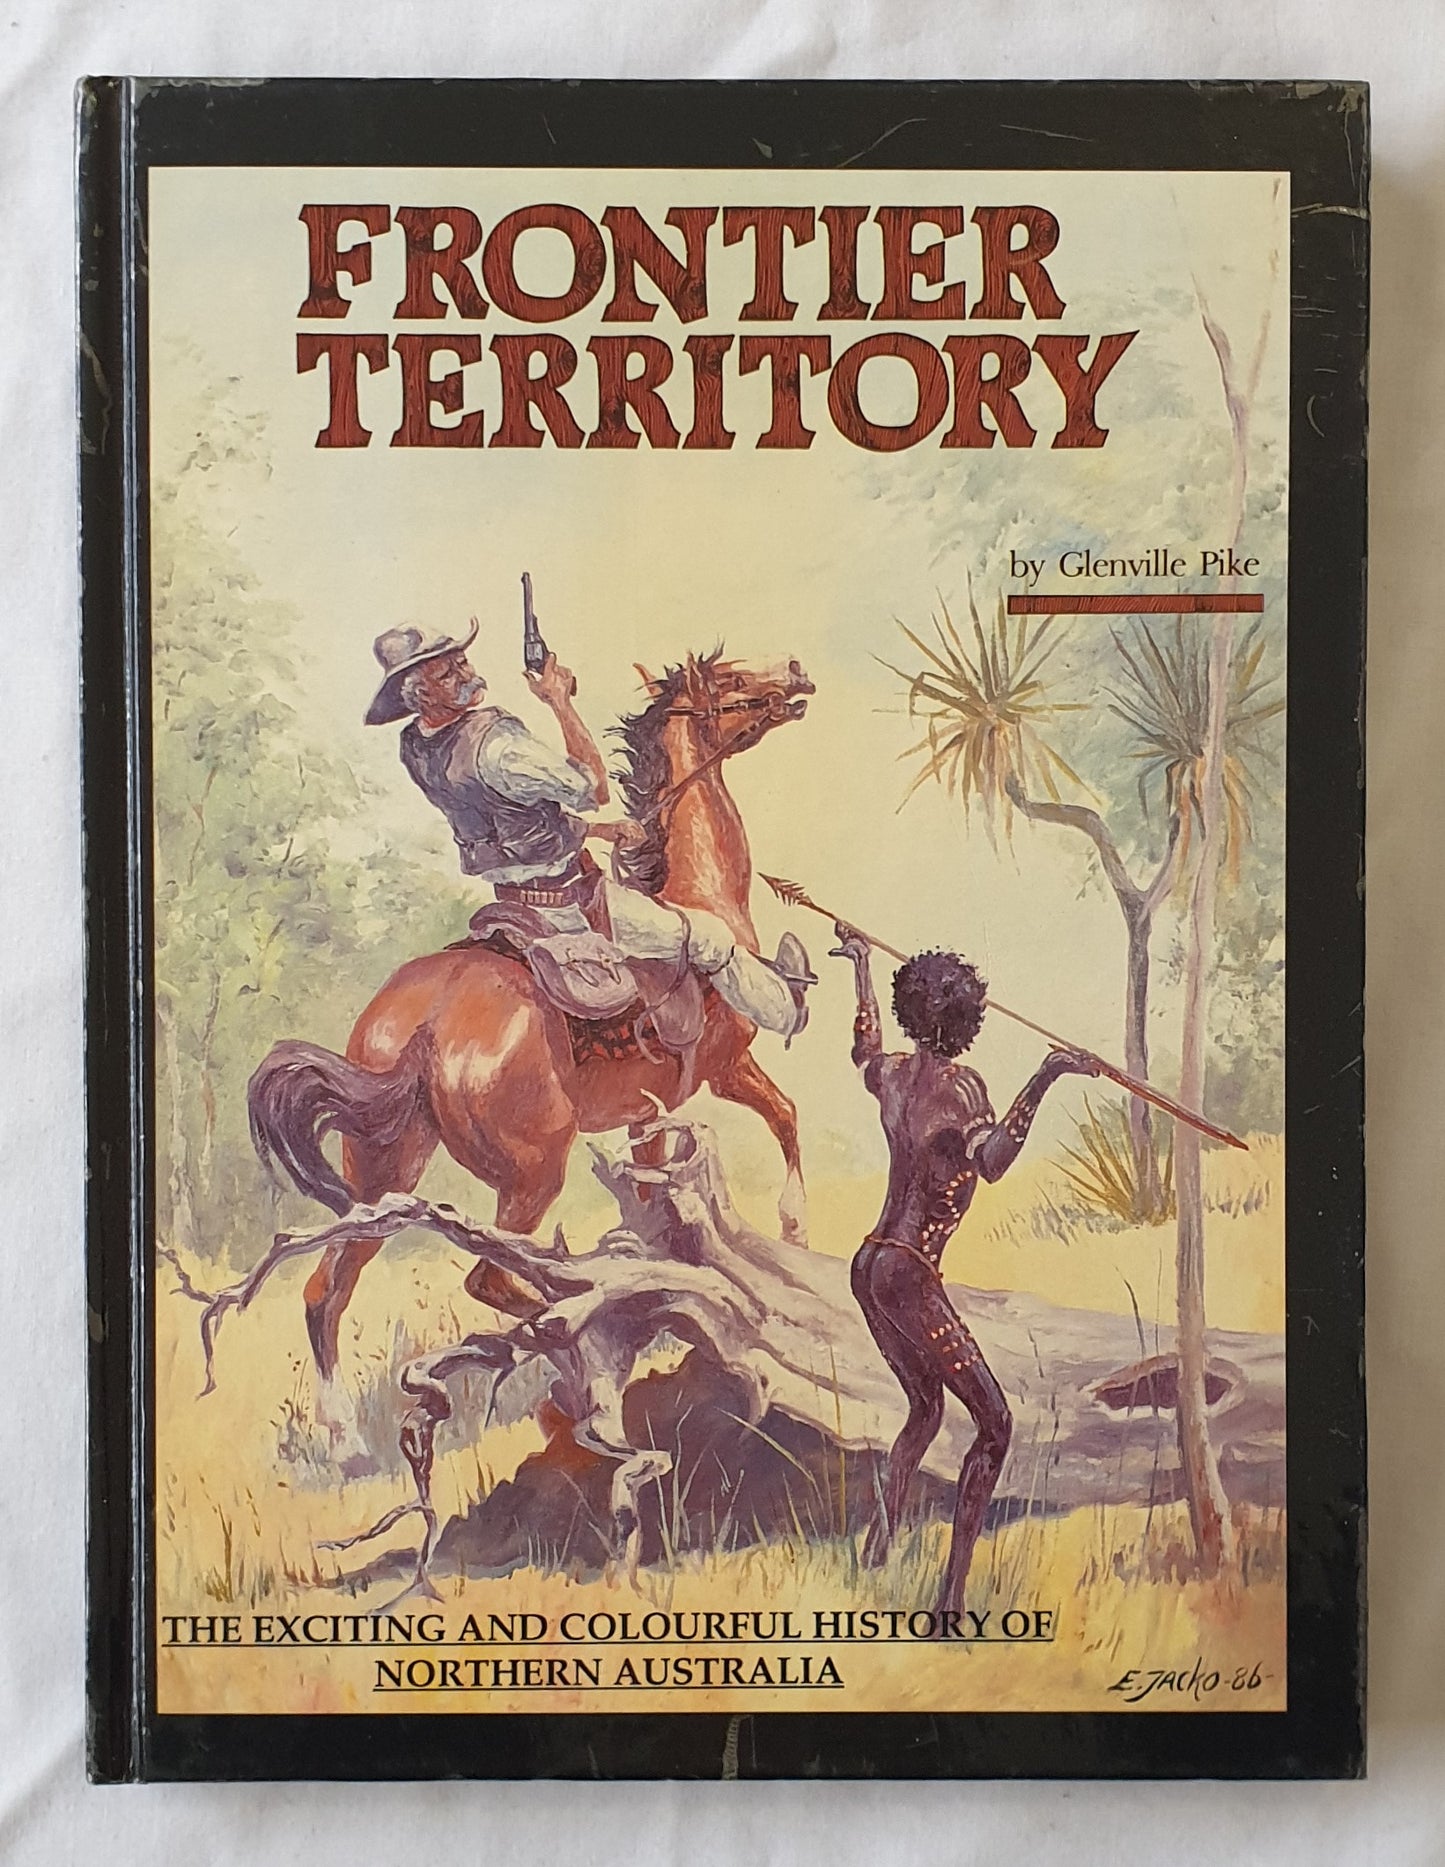 Frontier Territory by Glenville Pike